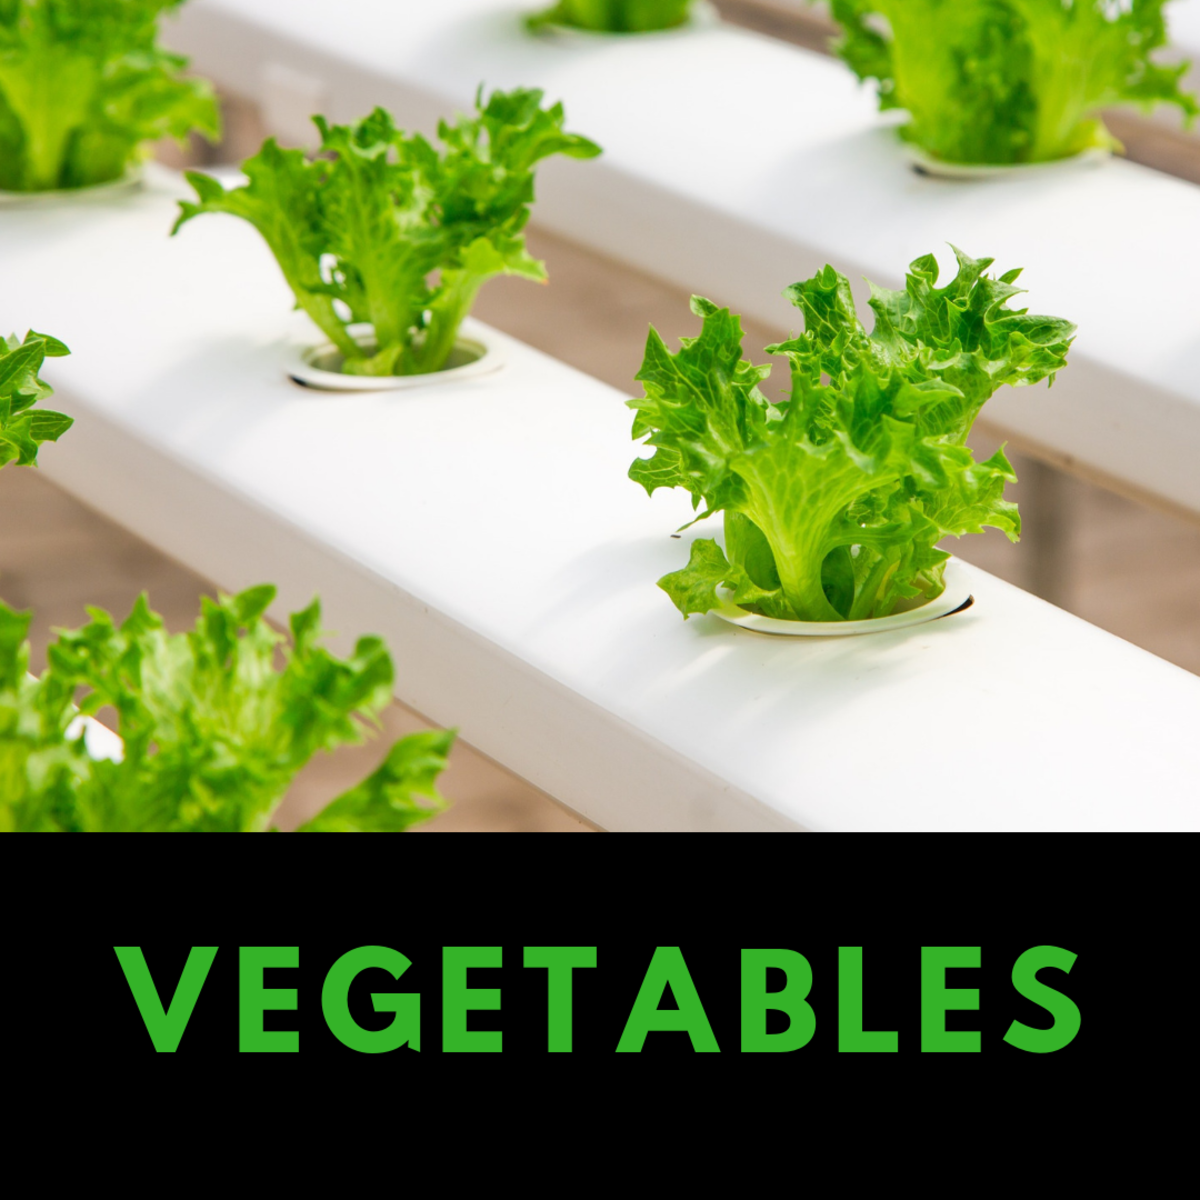 Vegetables can be grown hydroponically, too.